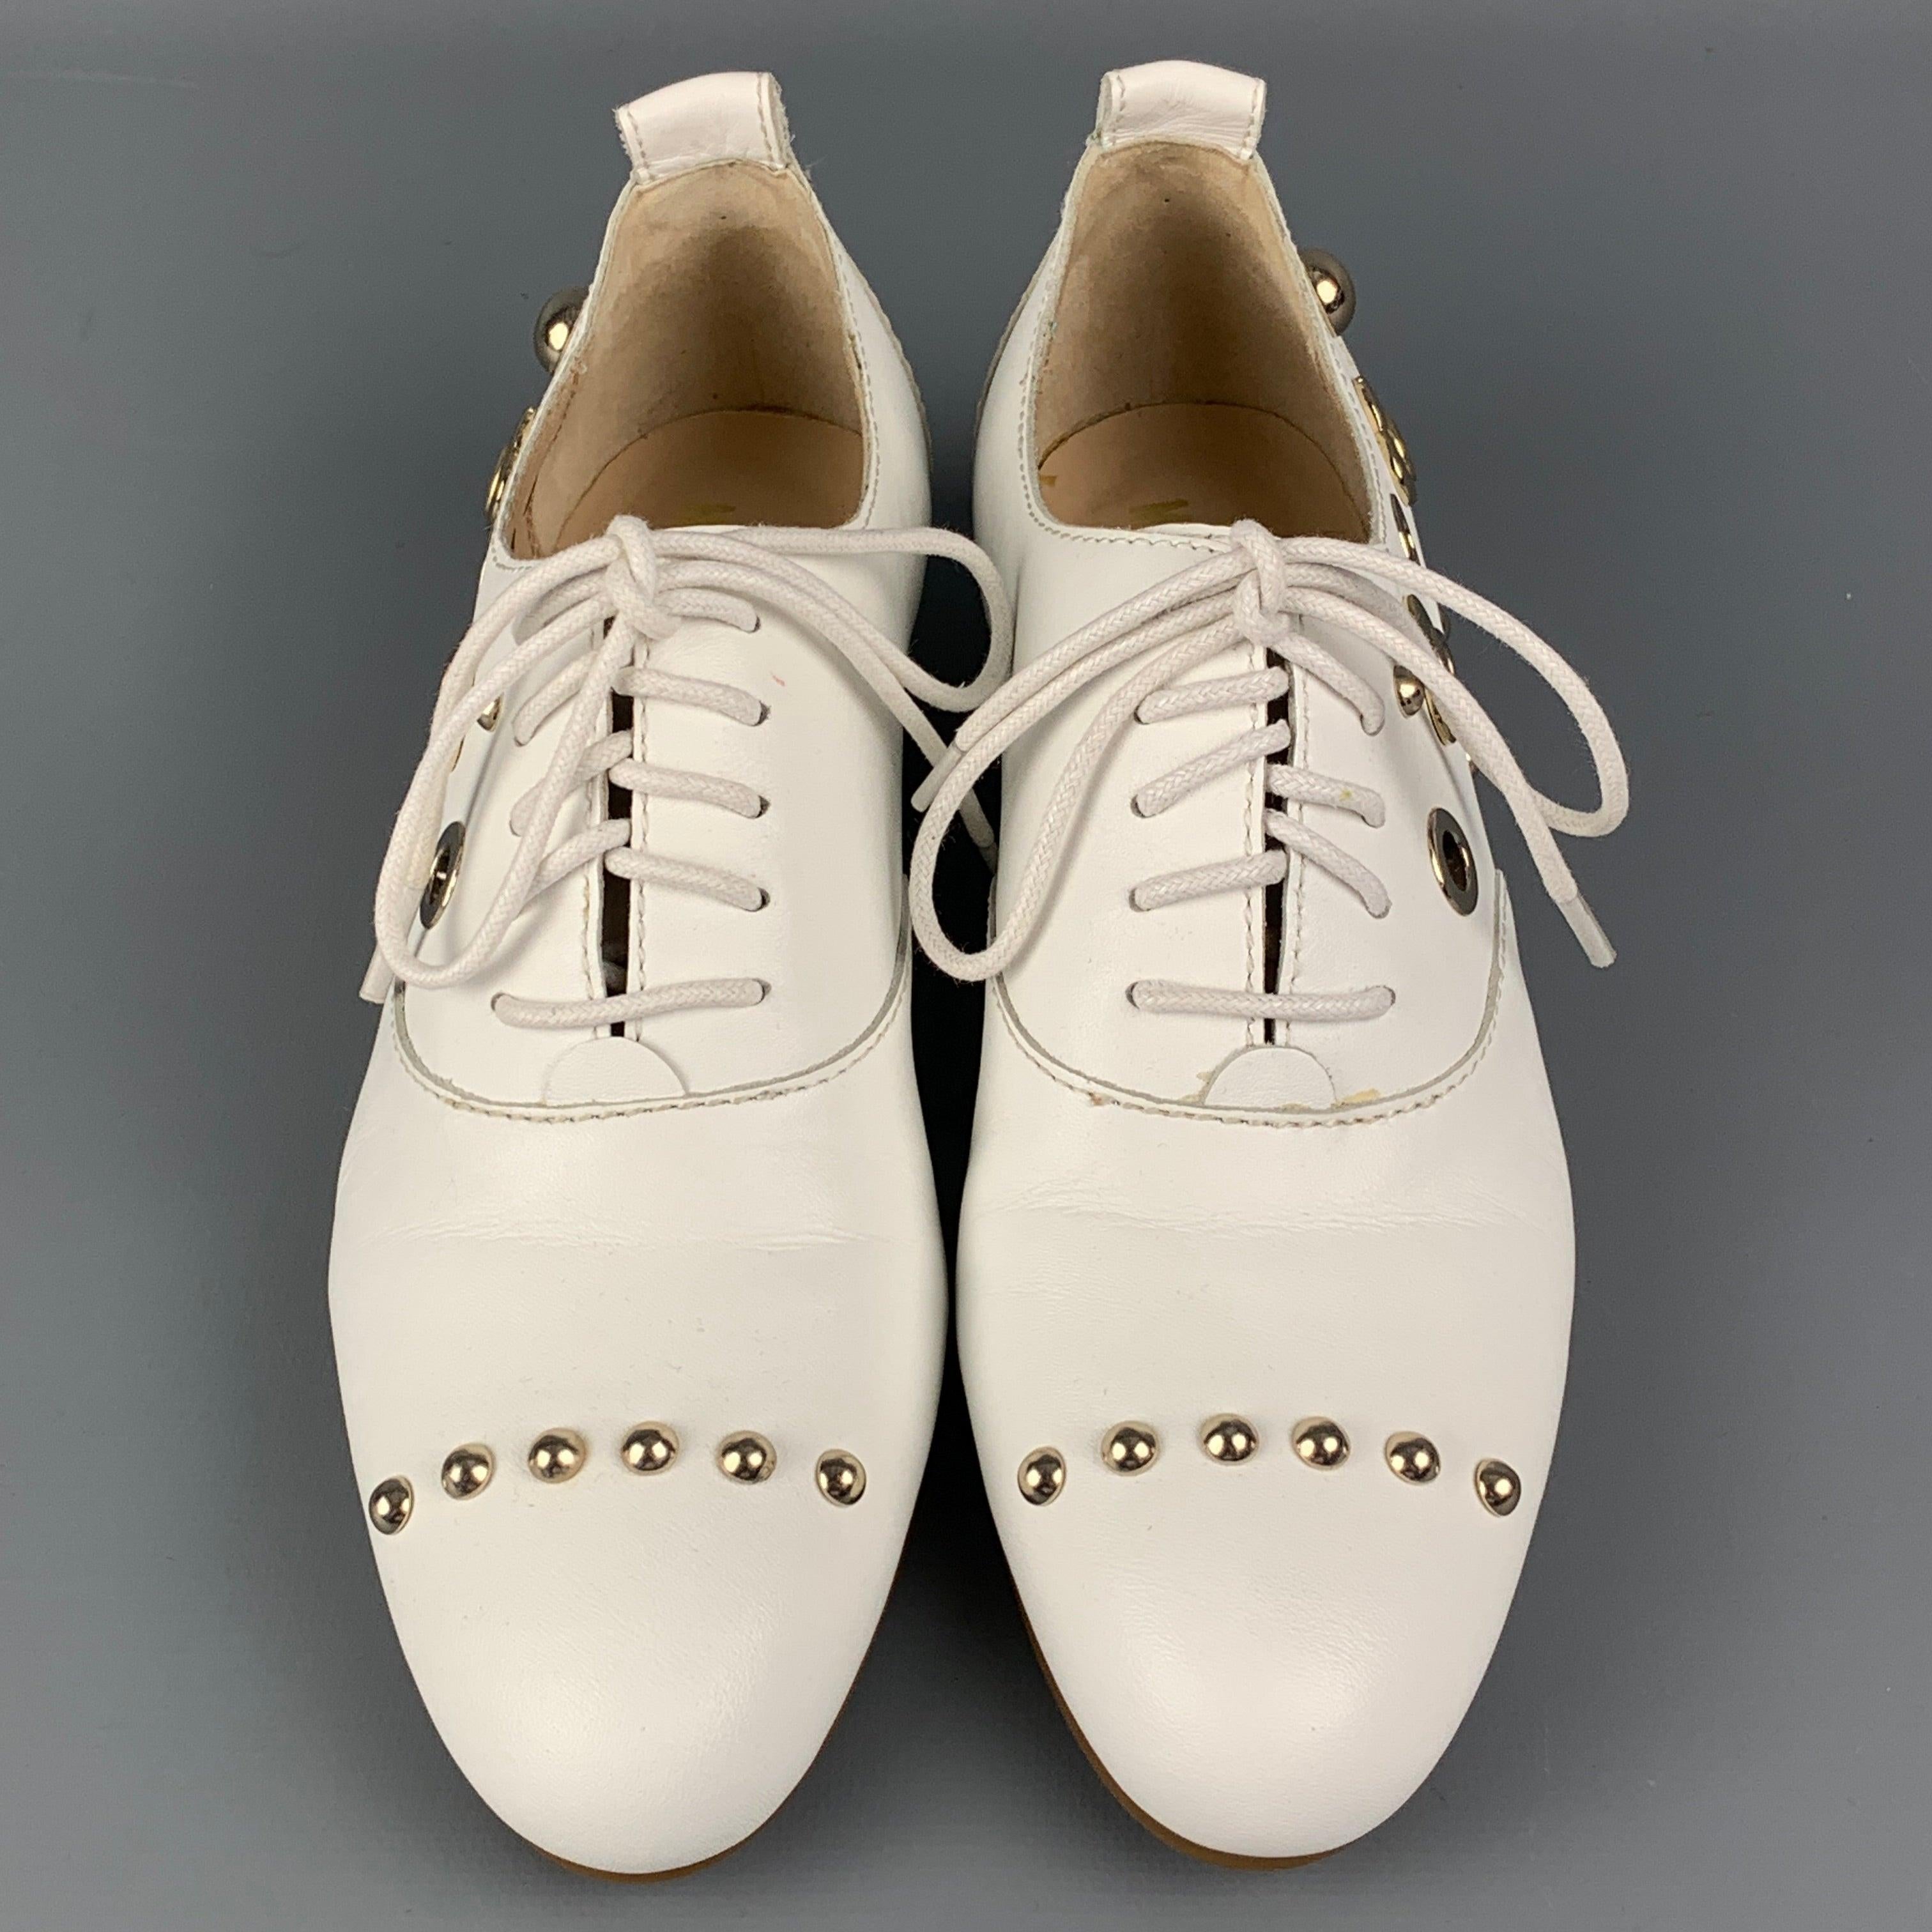 Women's LOVE MOSCHINO Size 5.5 White Leather Studded Flats For Sale